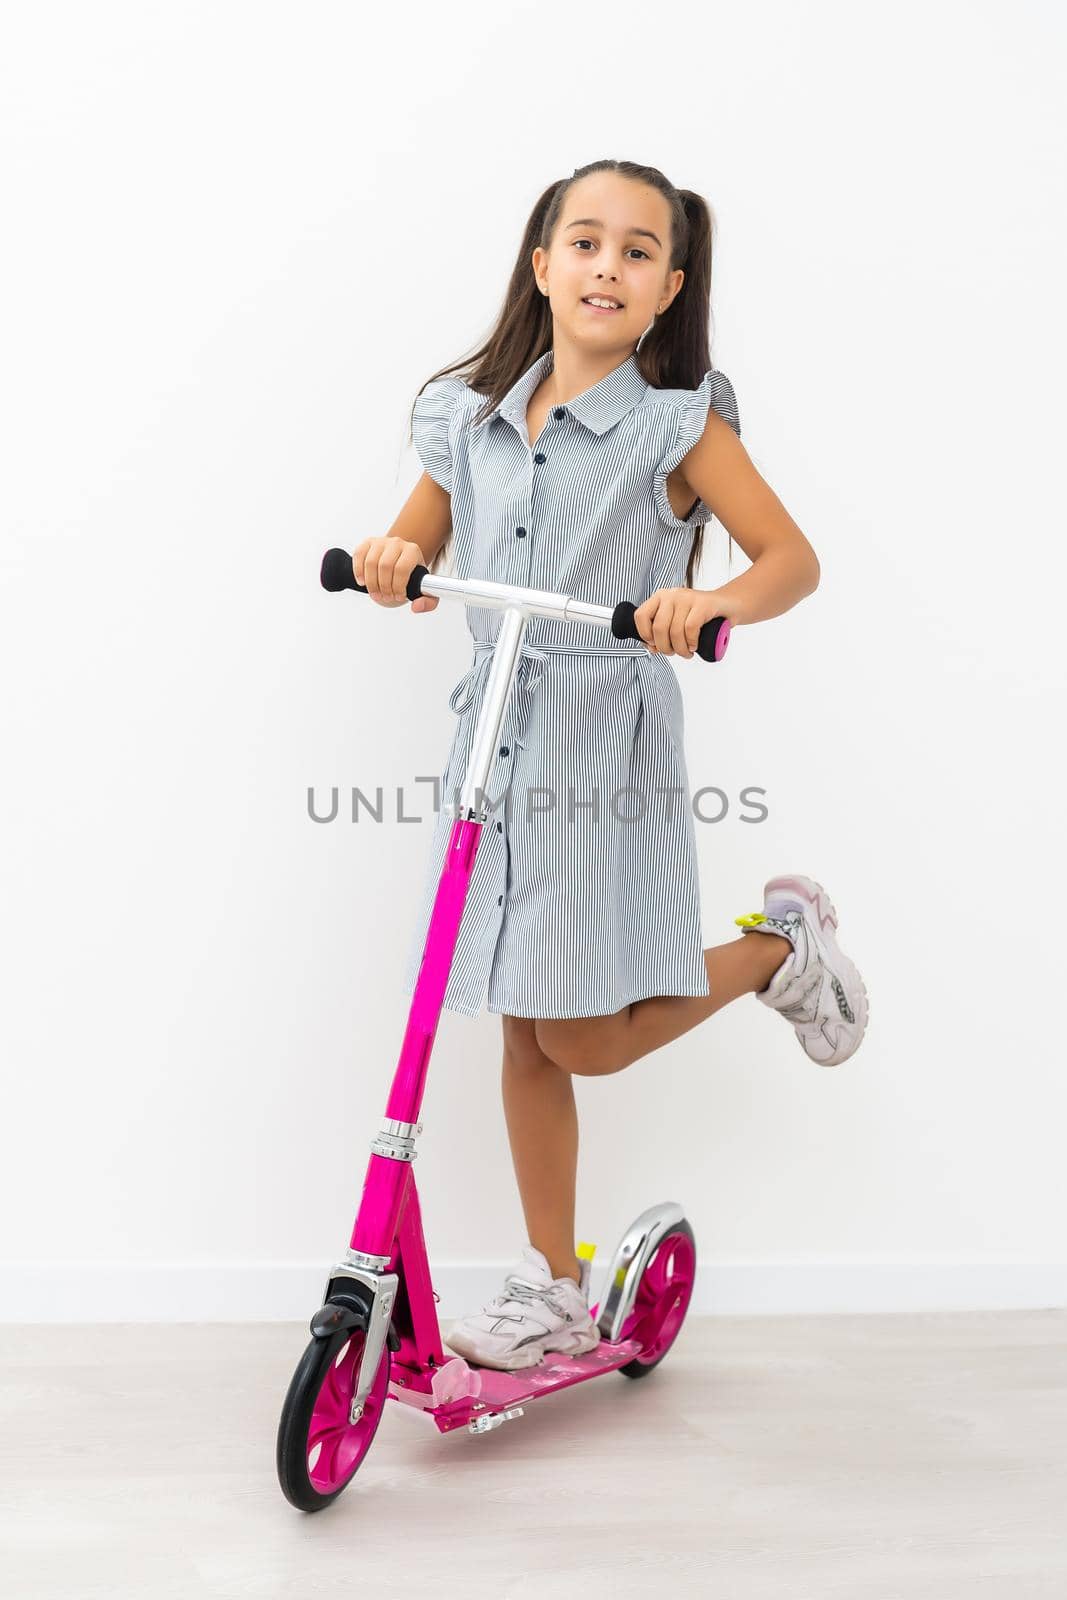 Adorable little girl using a scooter. Isolated on white background by Andelov13